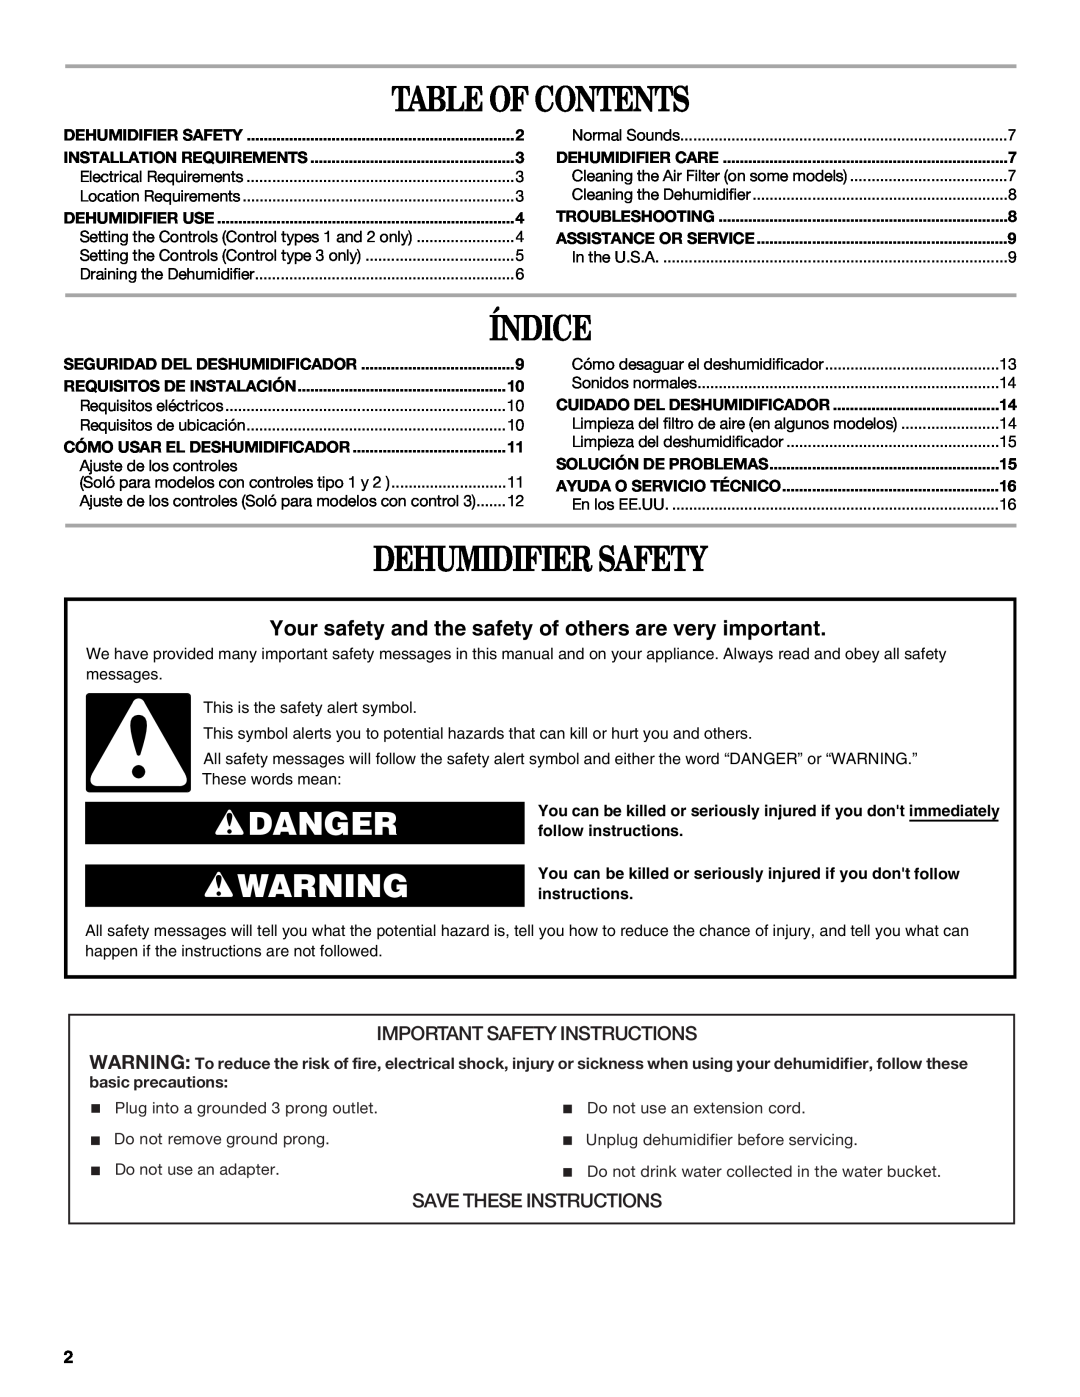 Whirlpool AD40DSS0 manual Table Of Contents, Índice, Dehumidifier Safety, Danger, Important Safety Instructions 